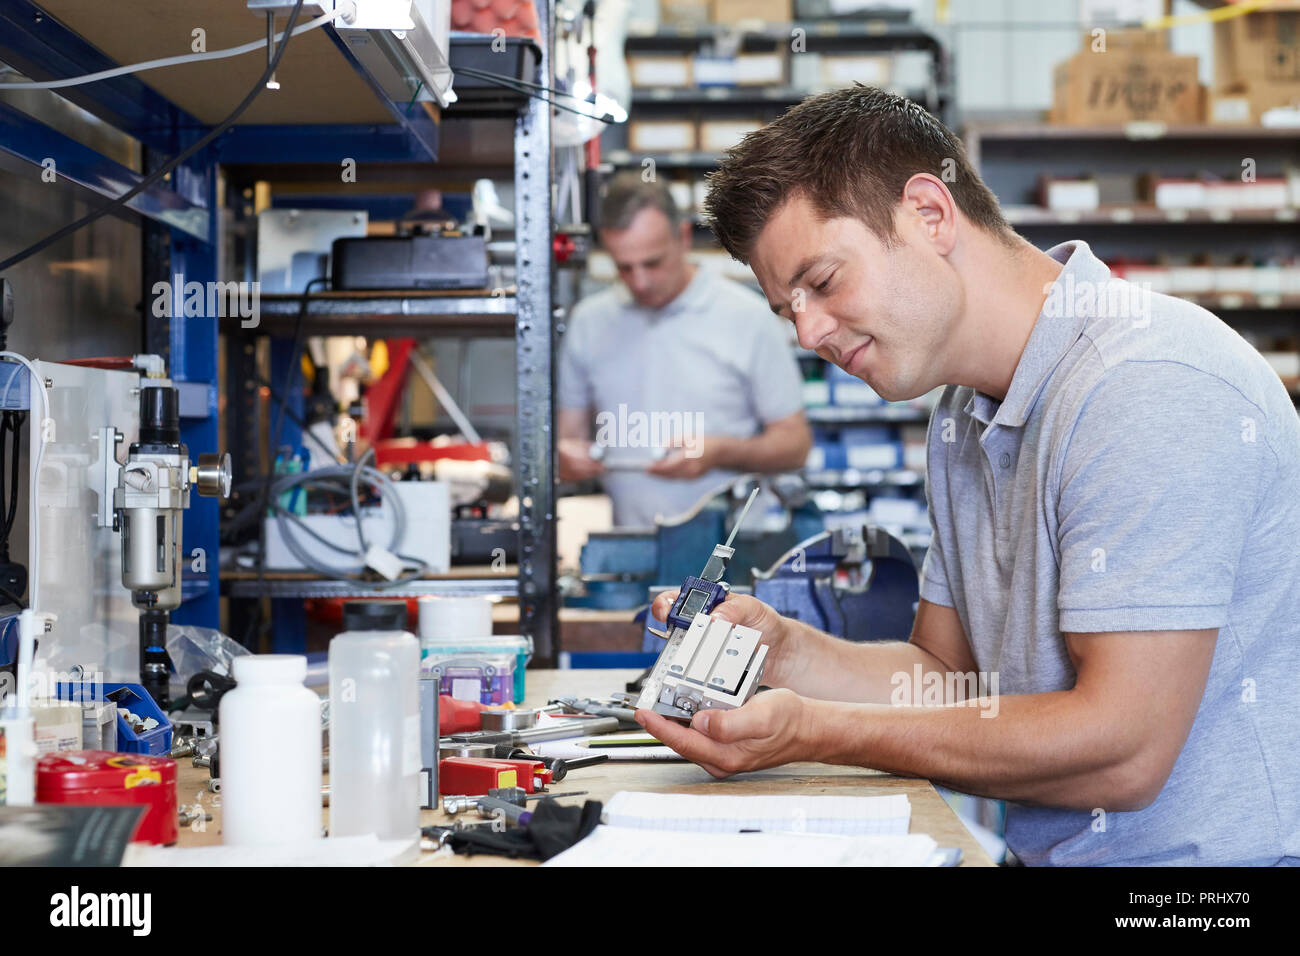 Engineer In Factory Measuring Component At Work Bench Using Micrometer Stock Photo